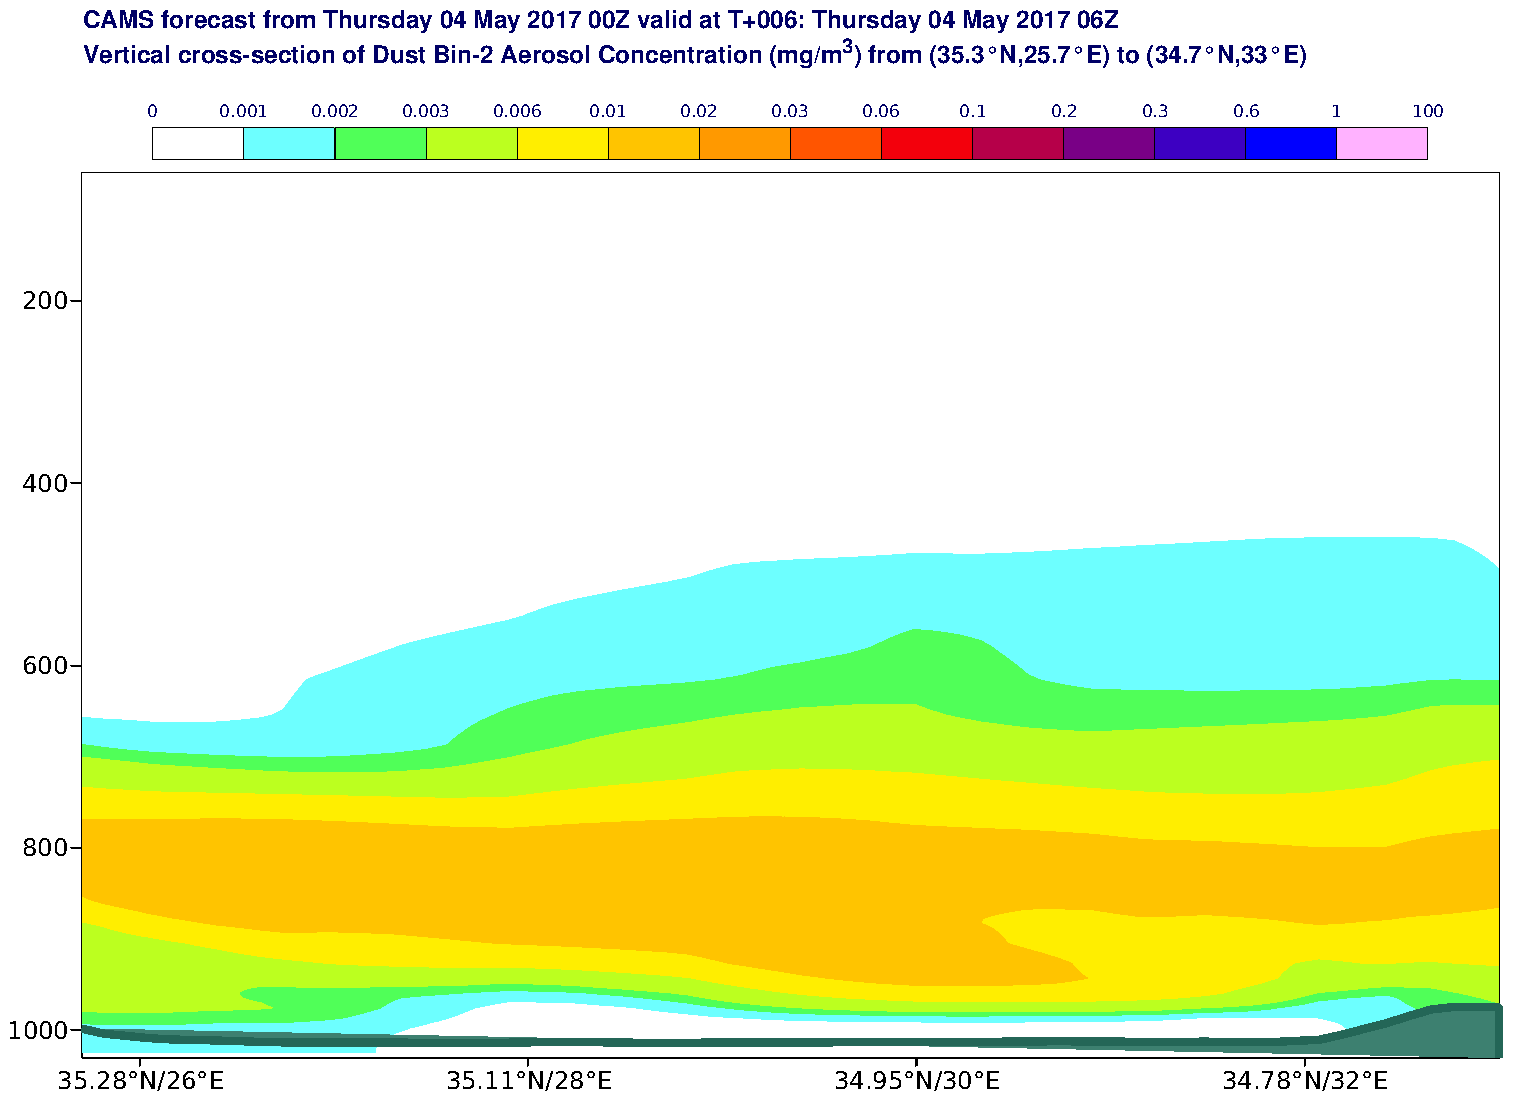 Vertical cross-section of Dust Bin-2 Aerosol Concentration (mg/m3) valid at T6 - 2017-05-04 06:00